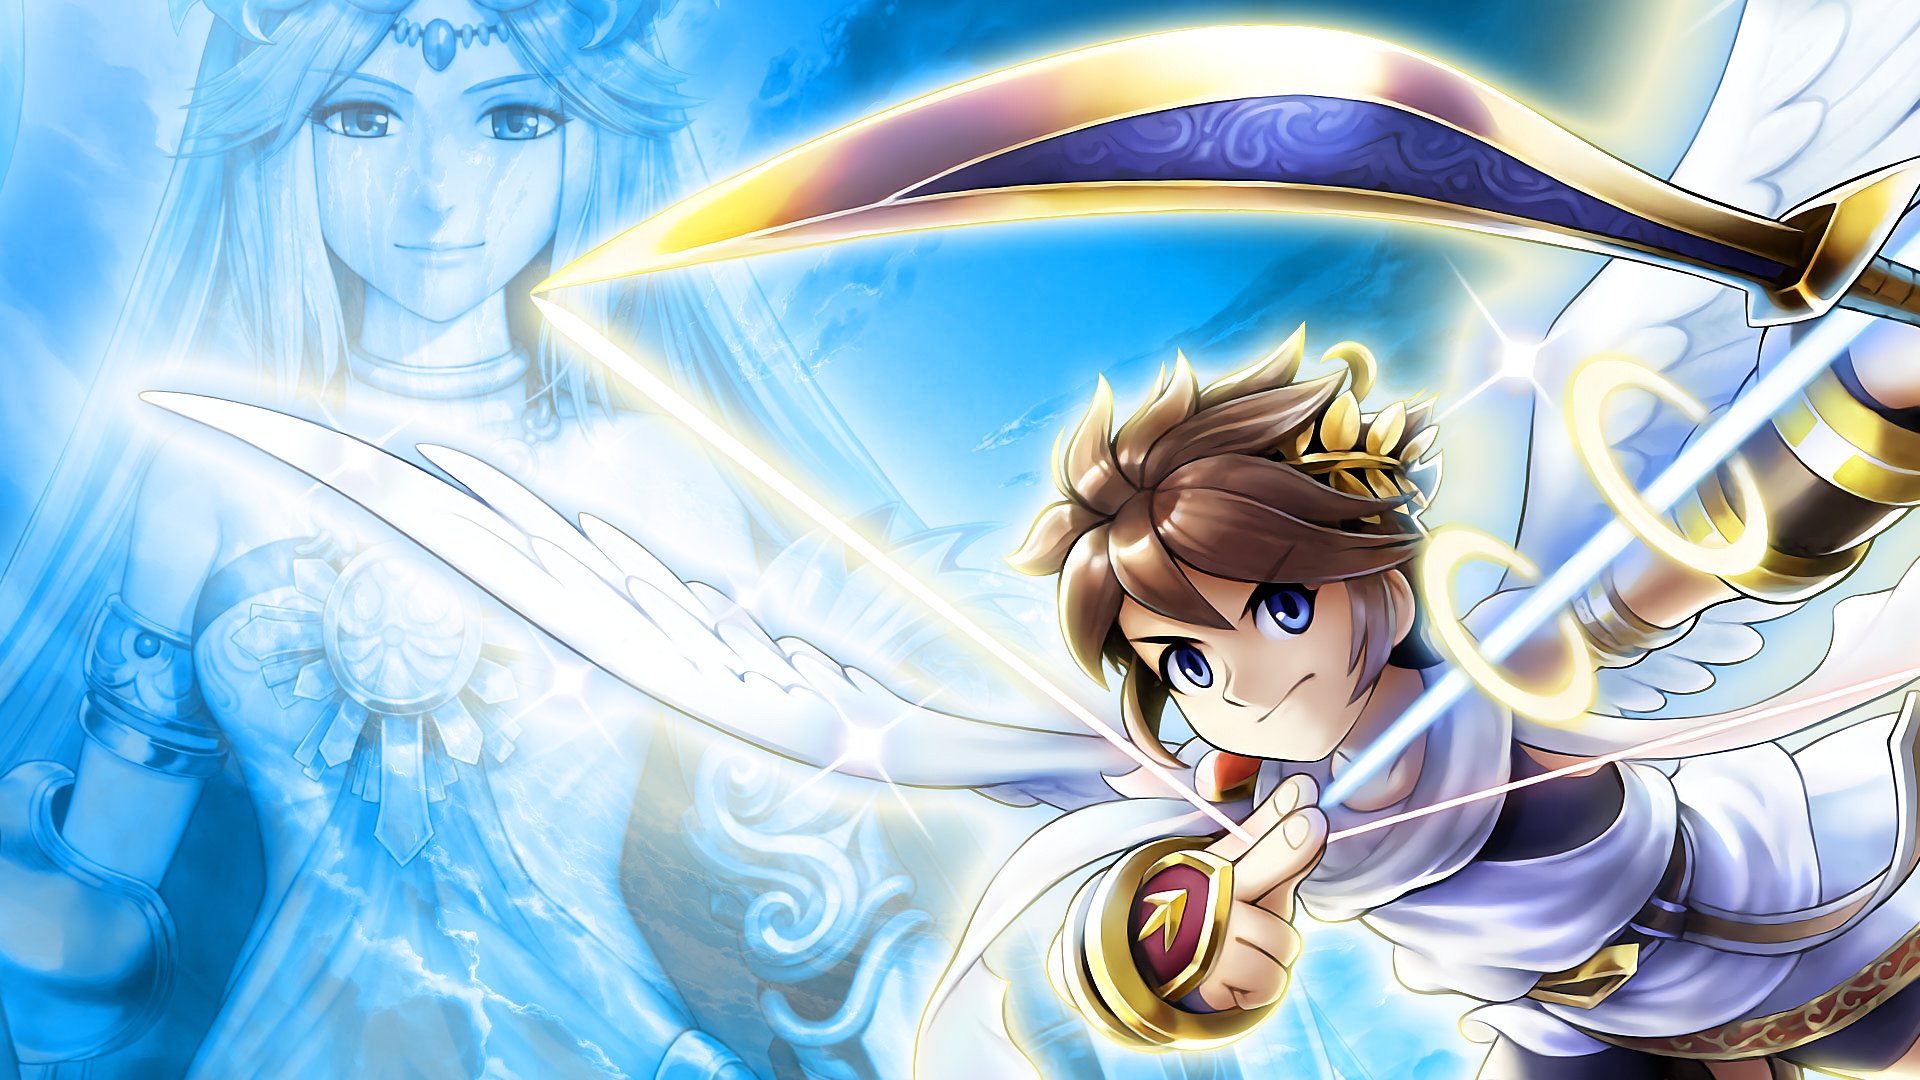 Uprising Hd Wallpaper - Kid Icarus Uprising Pit Png , HD Wallpaper & Backgrounds